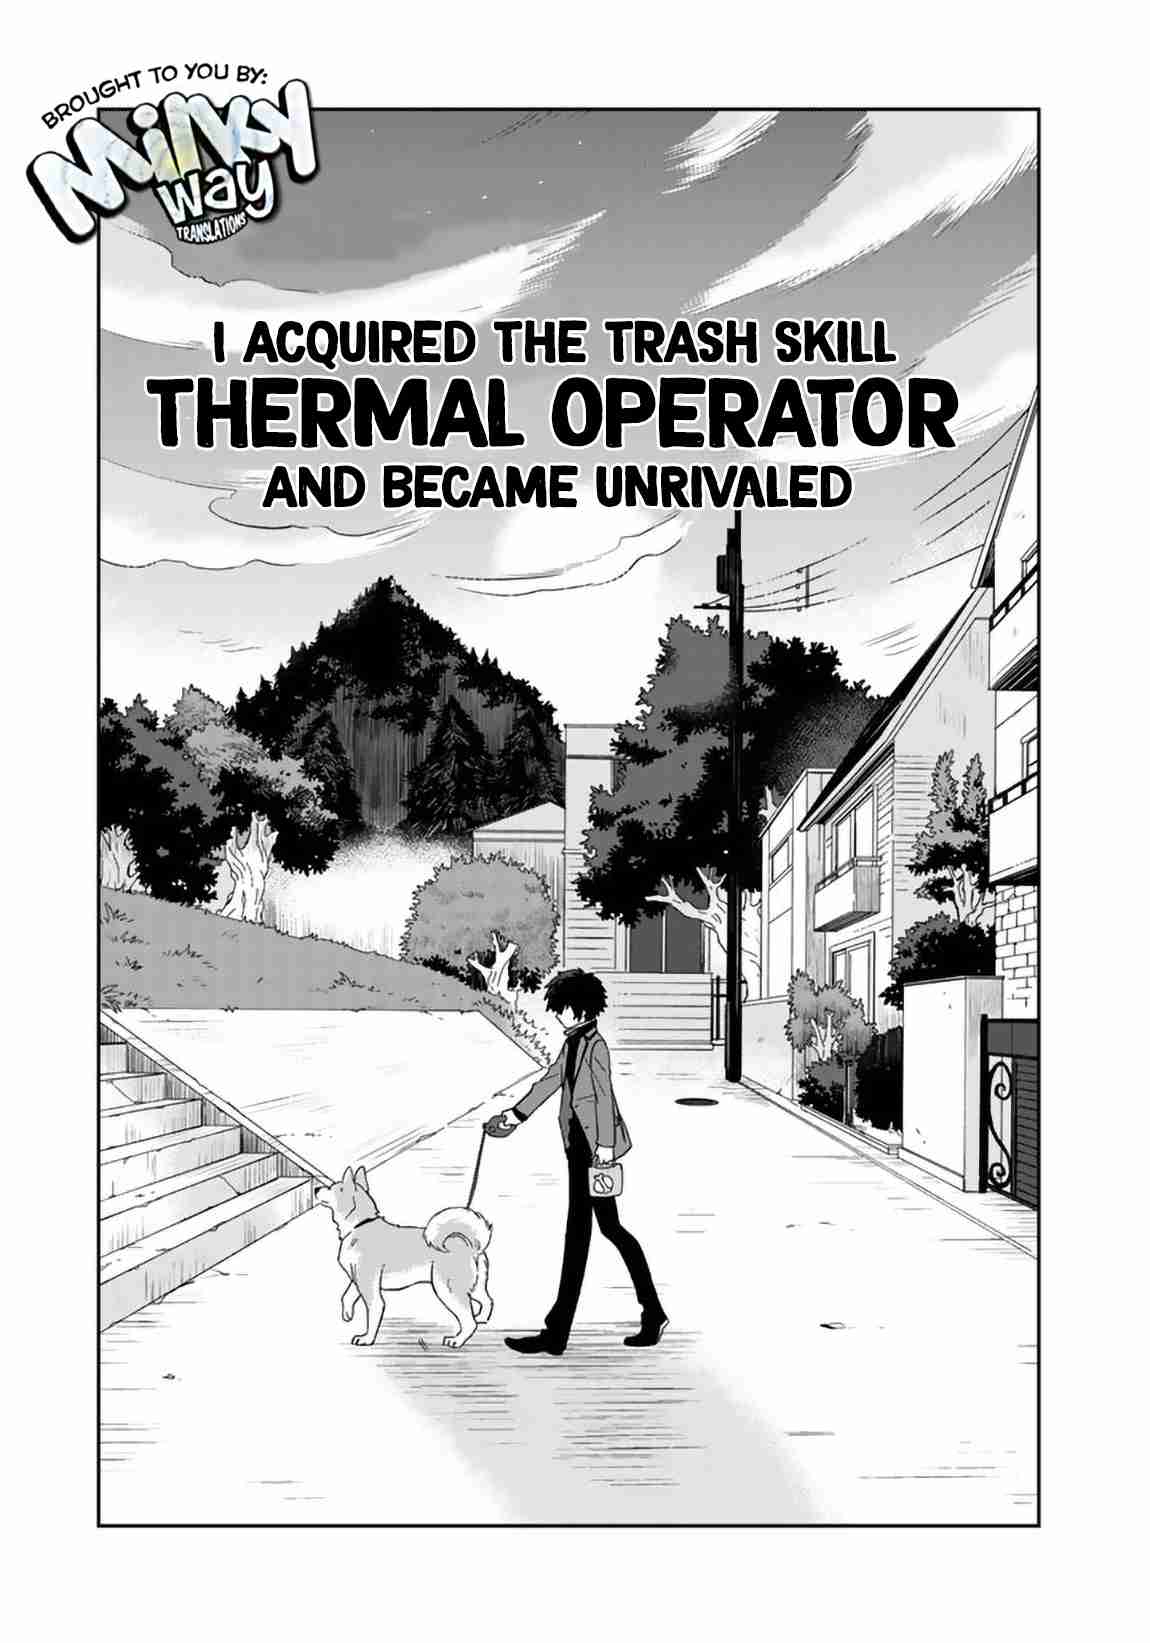 I, Who Acquired a Trash Skill 【Thermal Operator】, Became Unrivaled. Vol. 1 Ch. 6 The Shadow of Death